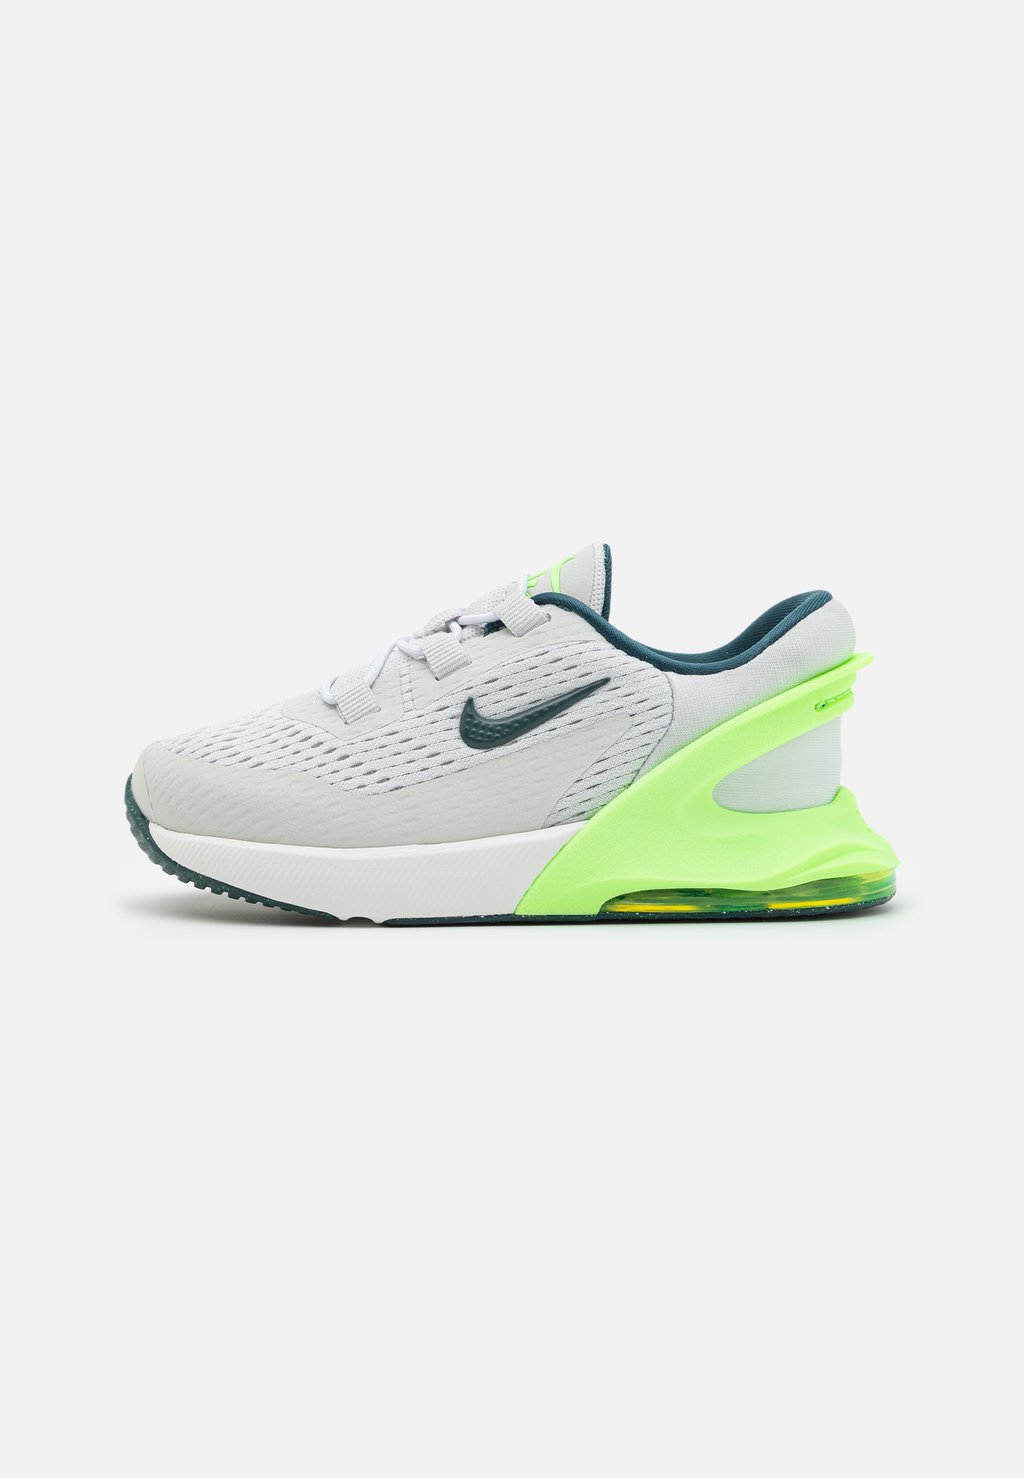 Низкие кроссовки Air Max 270 Go Unisex Nike, цвет photon dust/deep jungle/lime blast/summit white replaceable 20 filters industrial dust mask lime powder cement asbestos woodworking anti particulate rubber dust mask